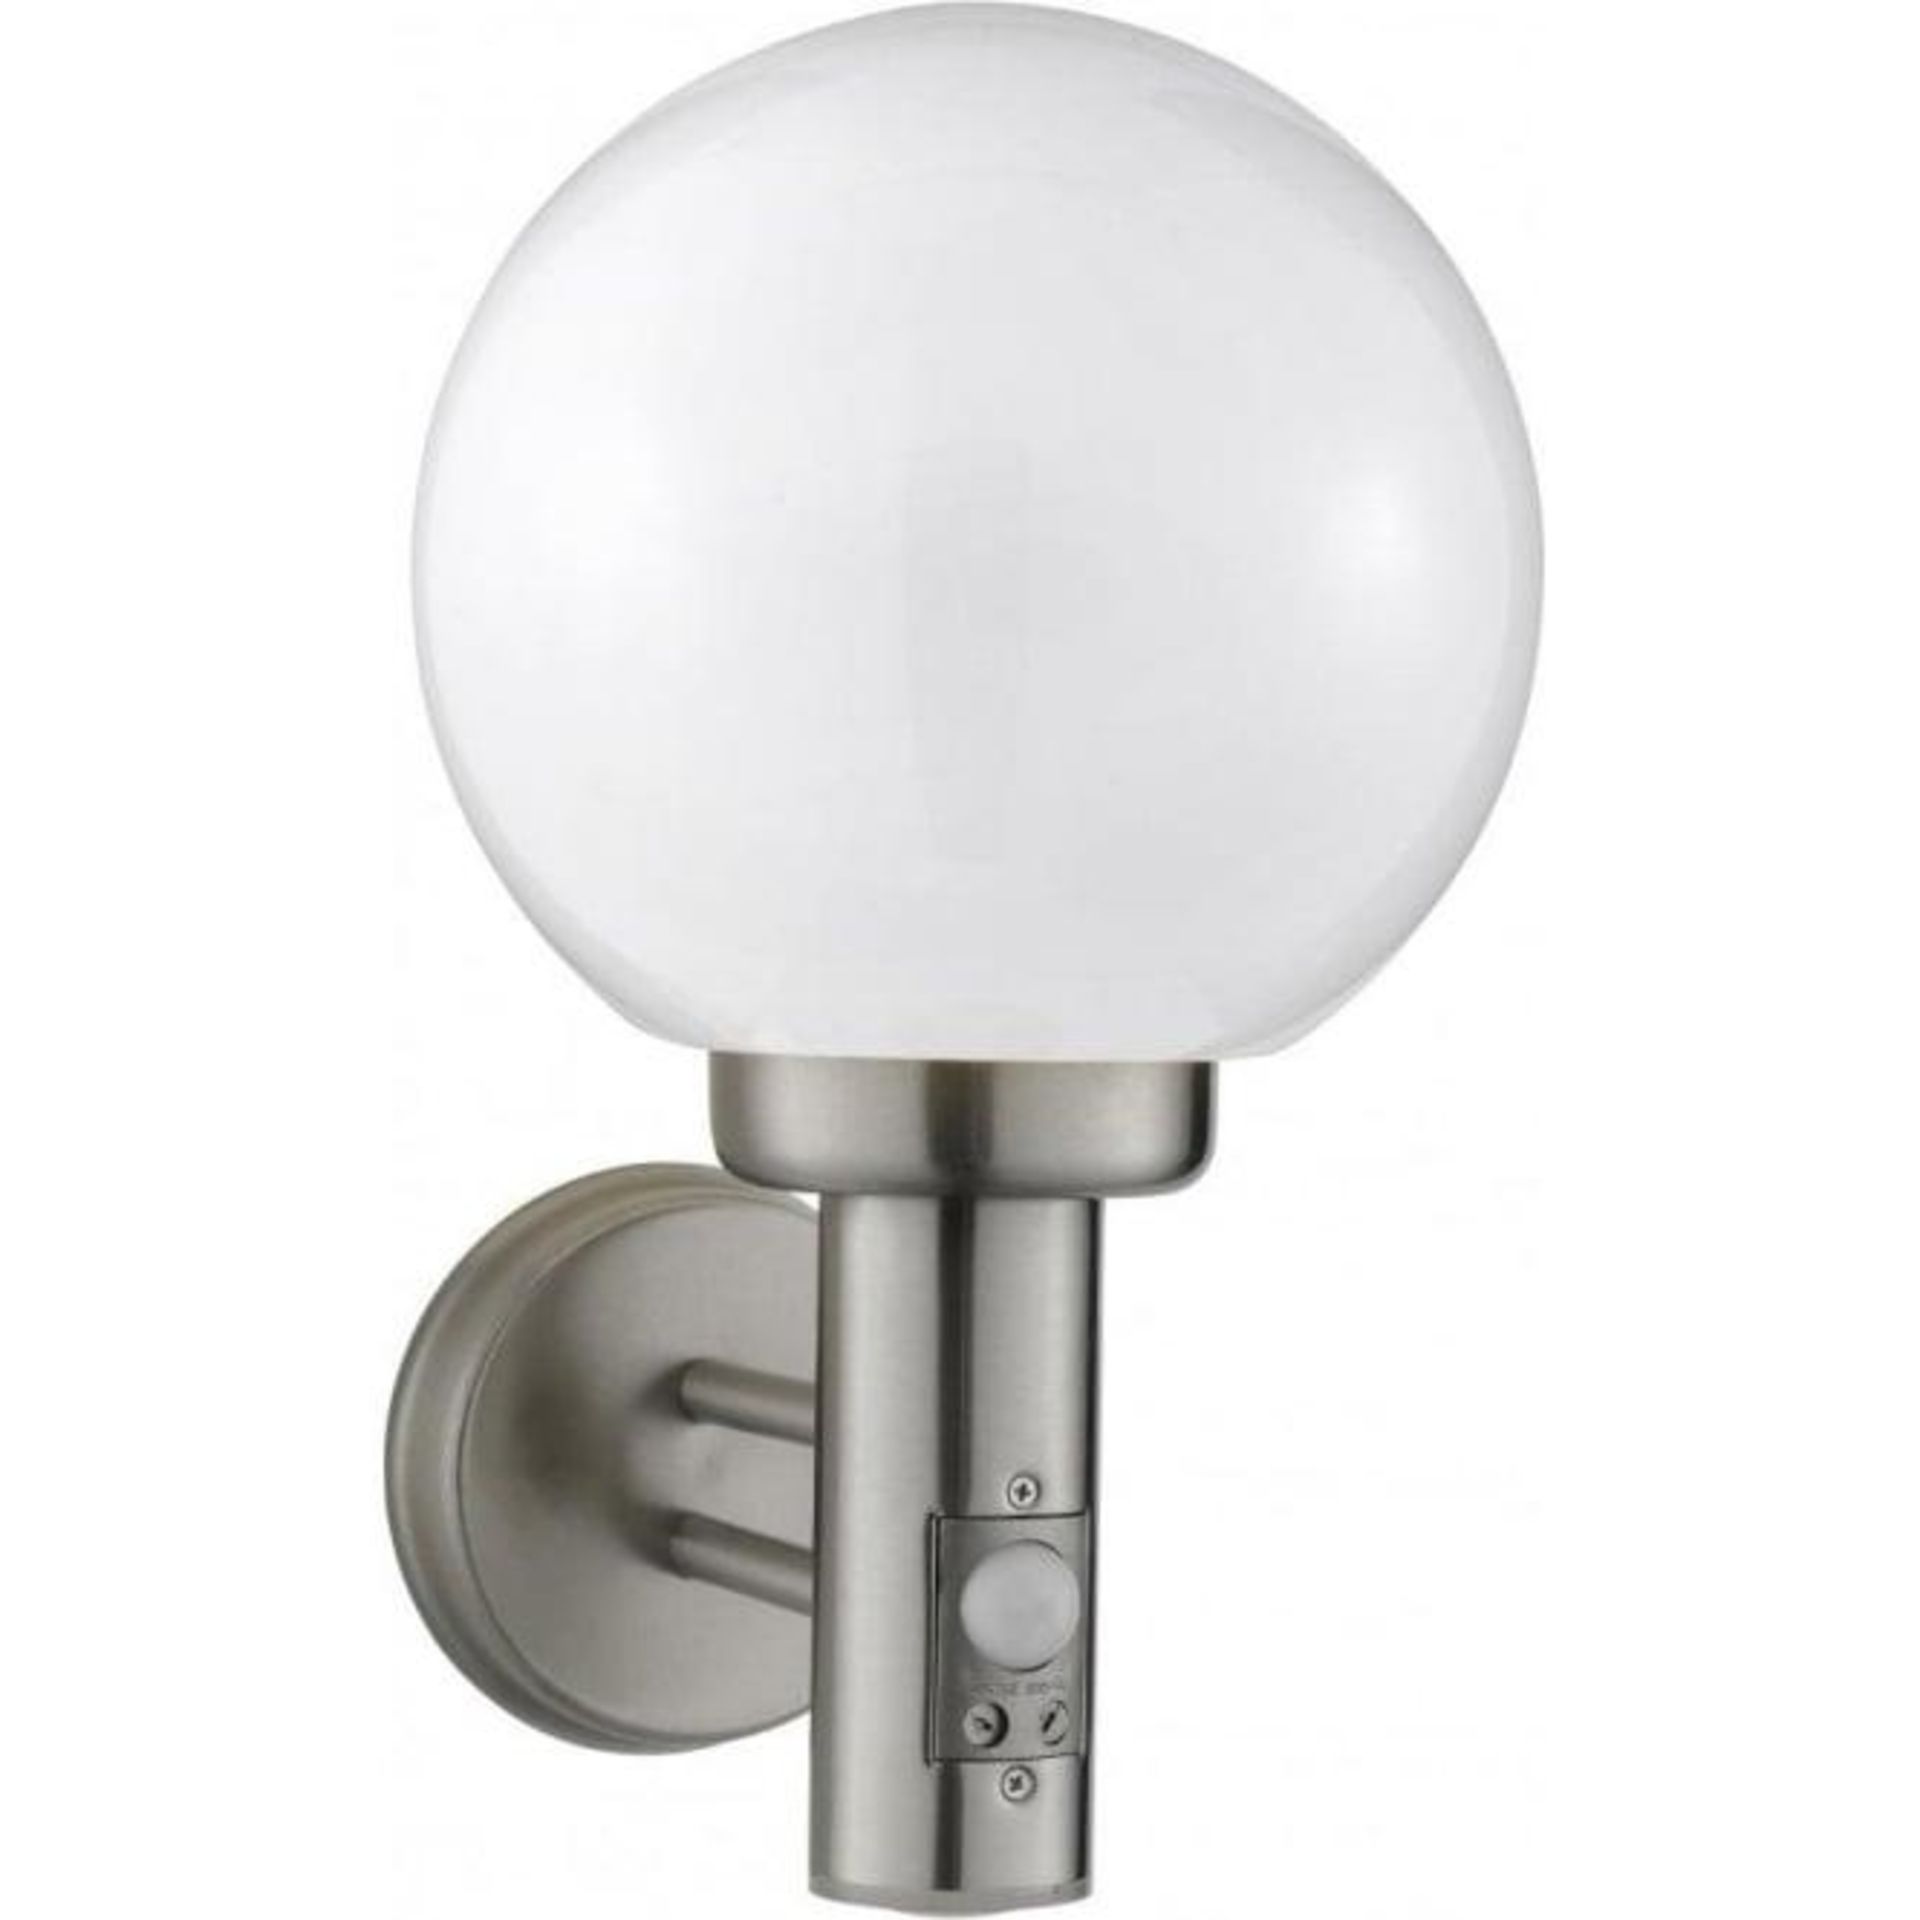 2 x Globe Outdoor Wall Light With PIR Motion Sensor - Stainless Steel With Polycarbonate Shade - IP4 - Image 5 of 5